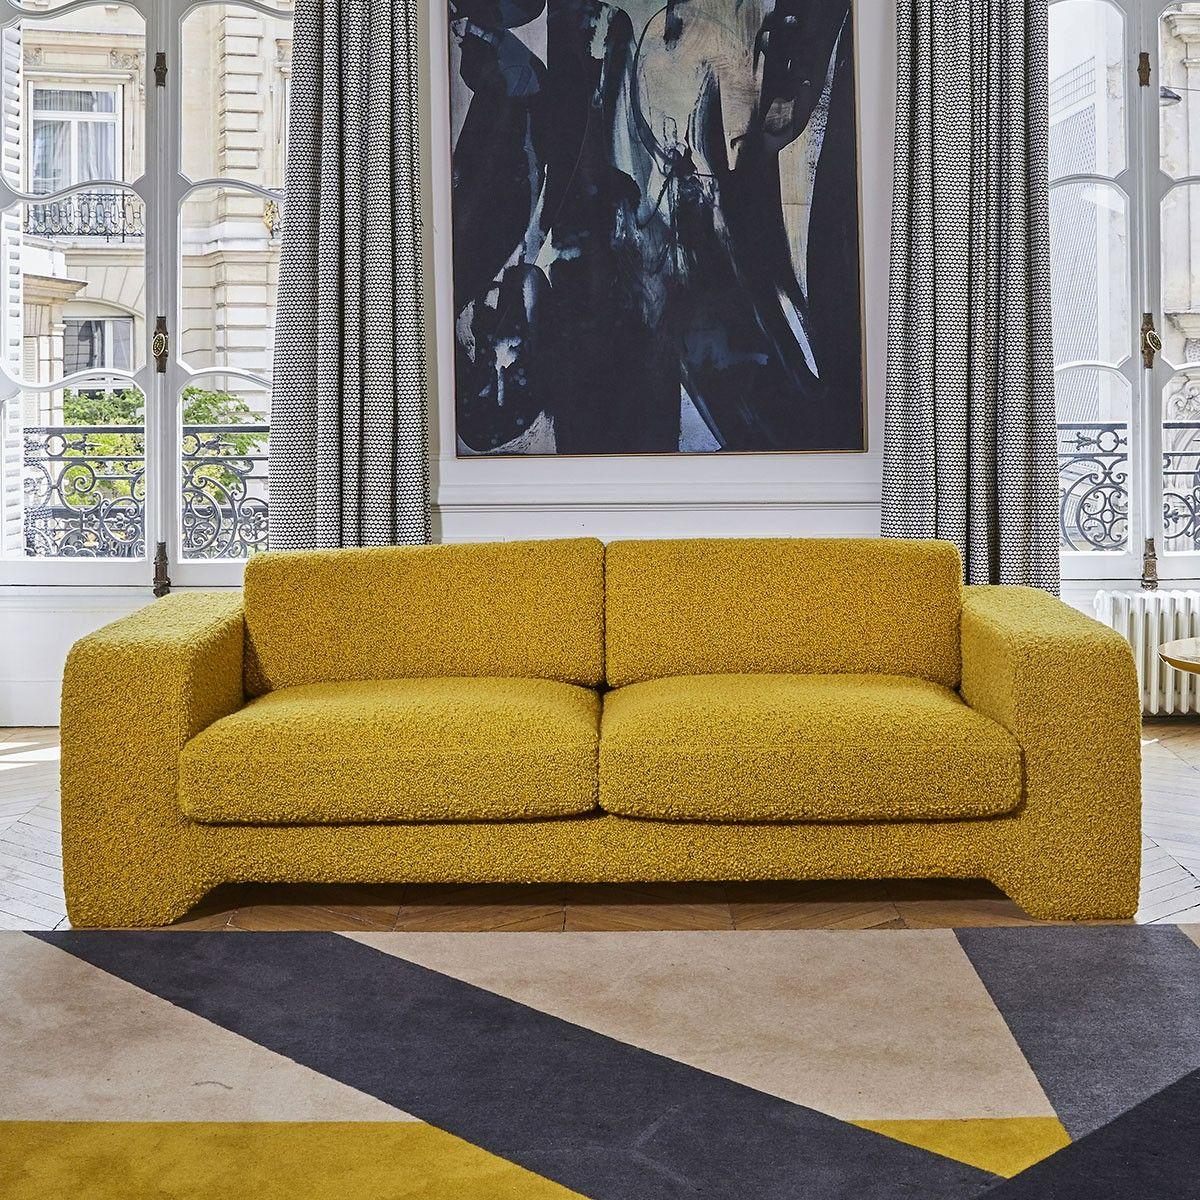 Popus Editions Giovanna 4 Seater Sofa in Citrine Marrakech Jacquard Fabric In New Condition For Sale In Paris, FR